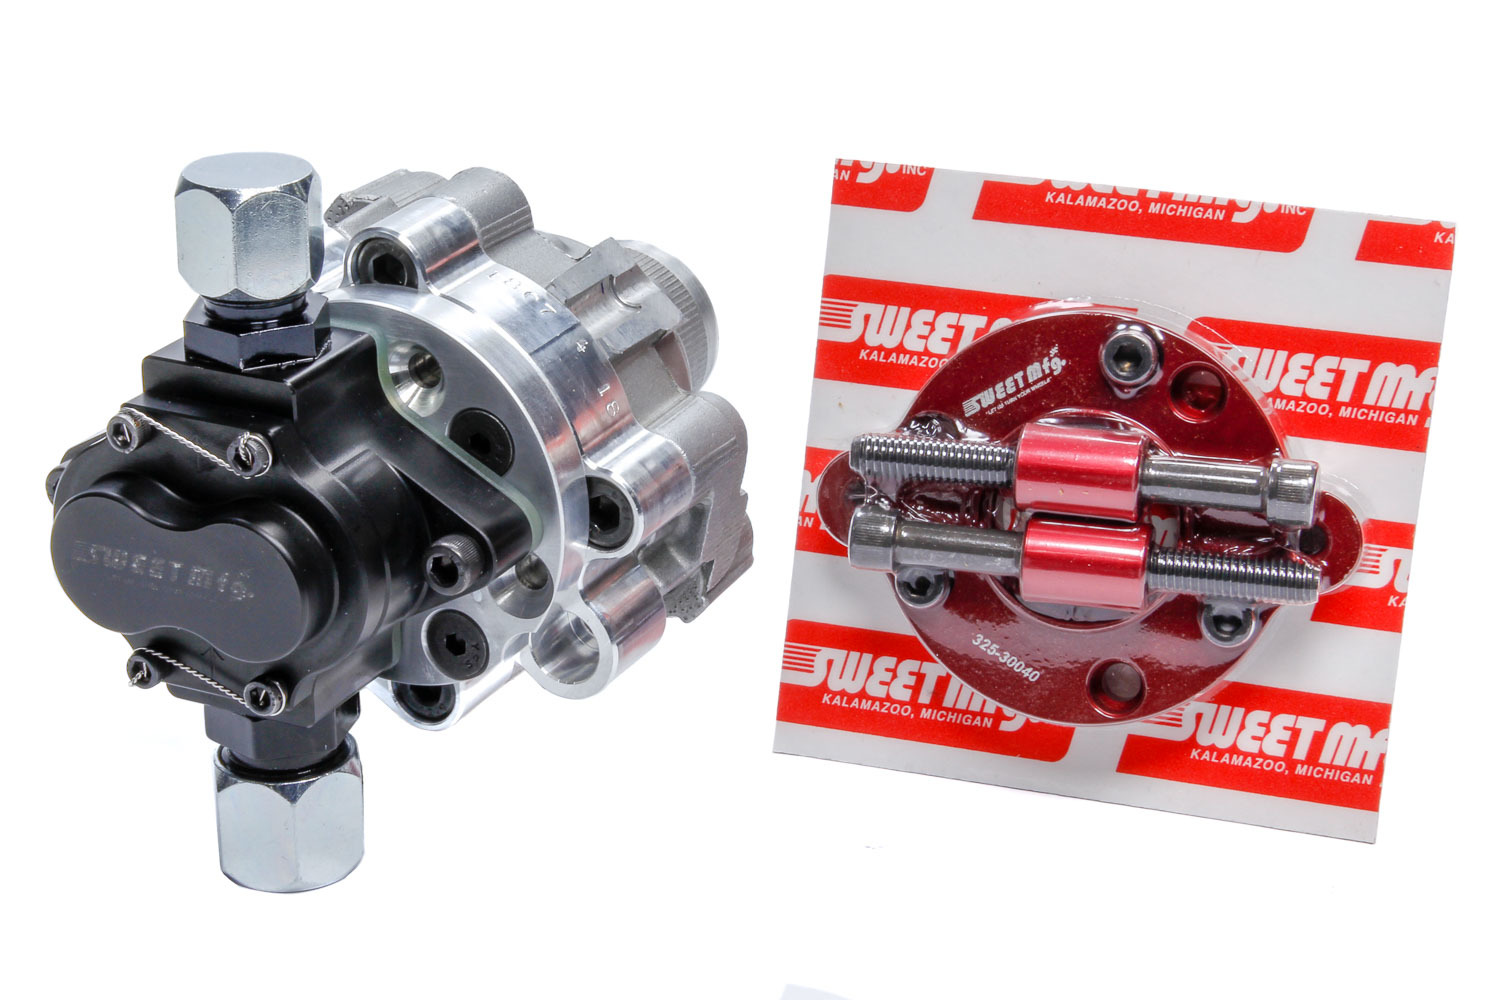 Sweet Manufacturing 305-85880 Tandem Pump Kit, Hex Driven, Adapter / Hardware / Spacer, Aluminum, Clear / Red Anodized, Gas / Alcohol, Kit